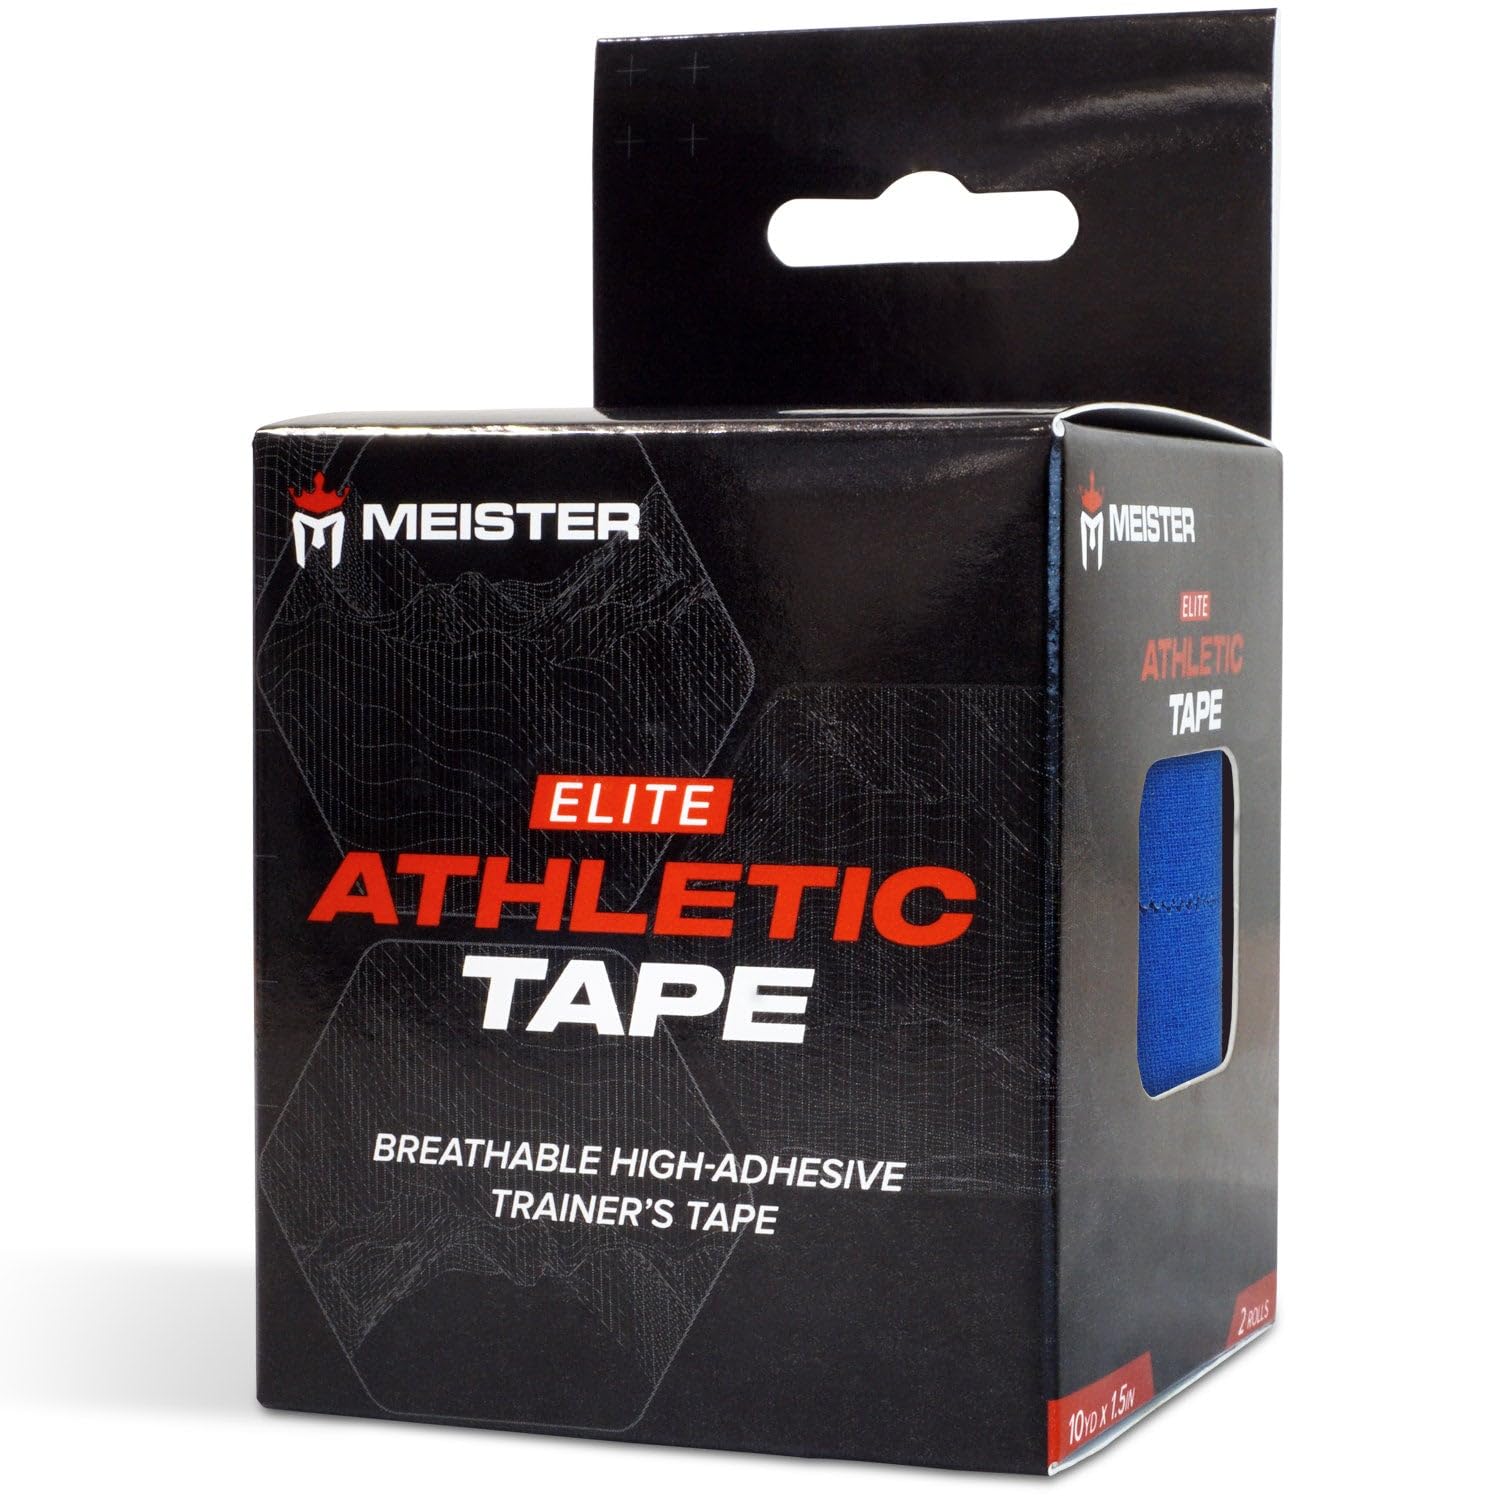 Meister Elite Athletic Tape - Breathable High-Adhesive Trainer's Tape - 2 Roll Pack - Blue